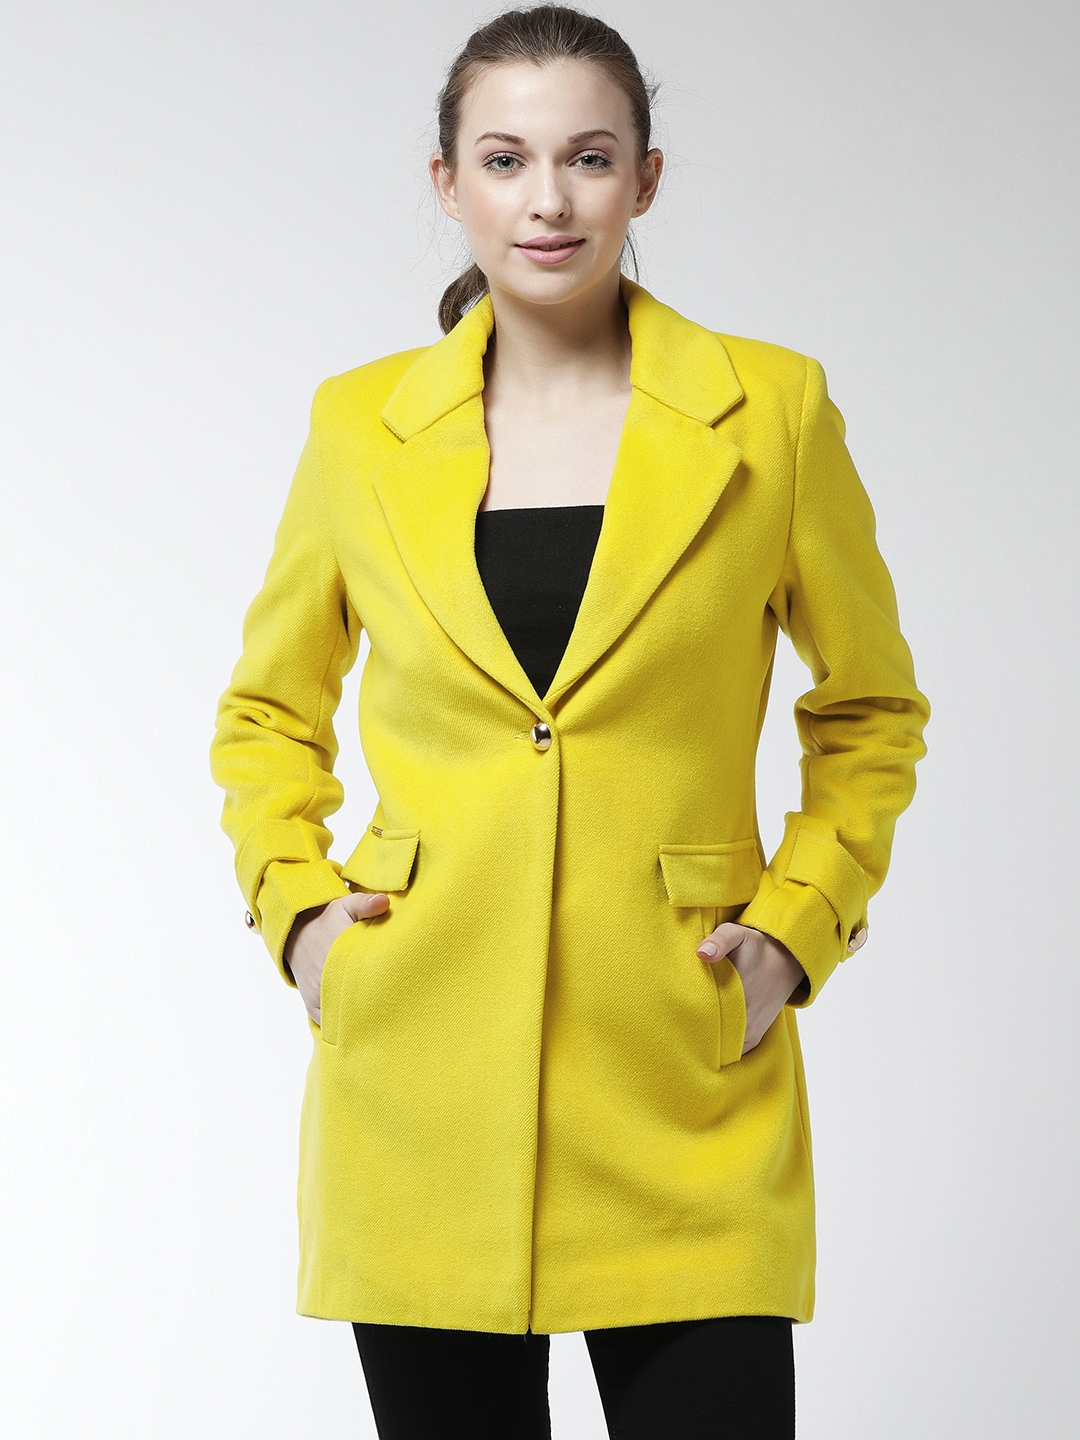 Kcocoo Womens Artificial Wool Coat Trench Jacket Ladies Warm Long